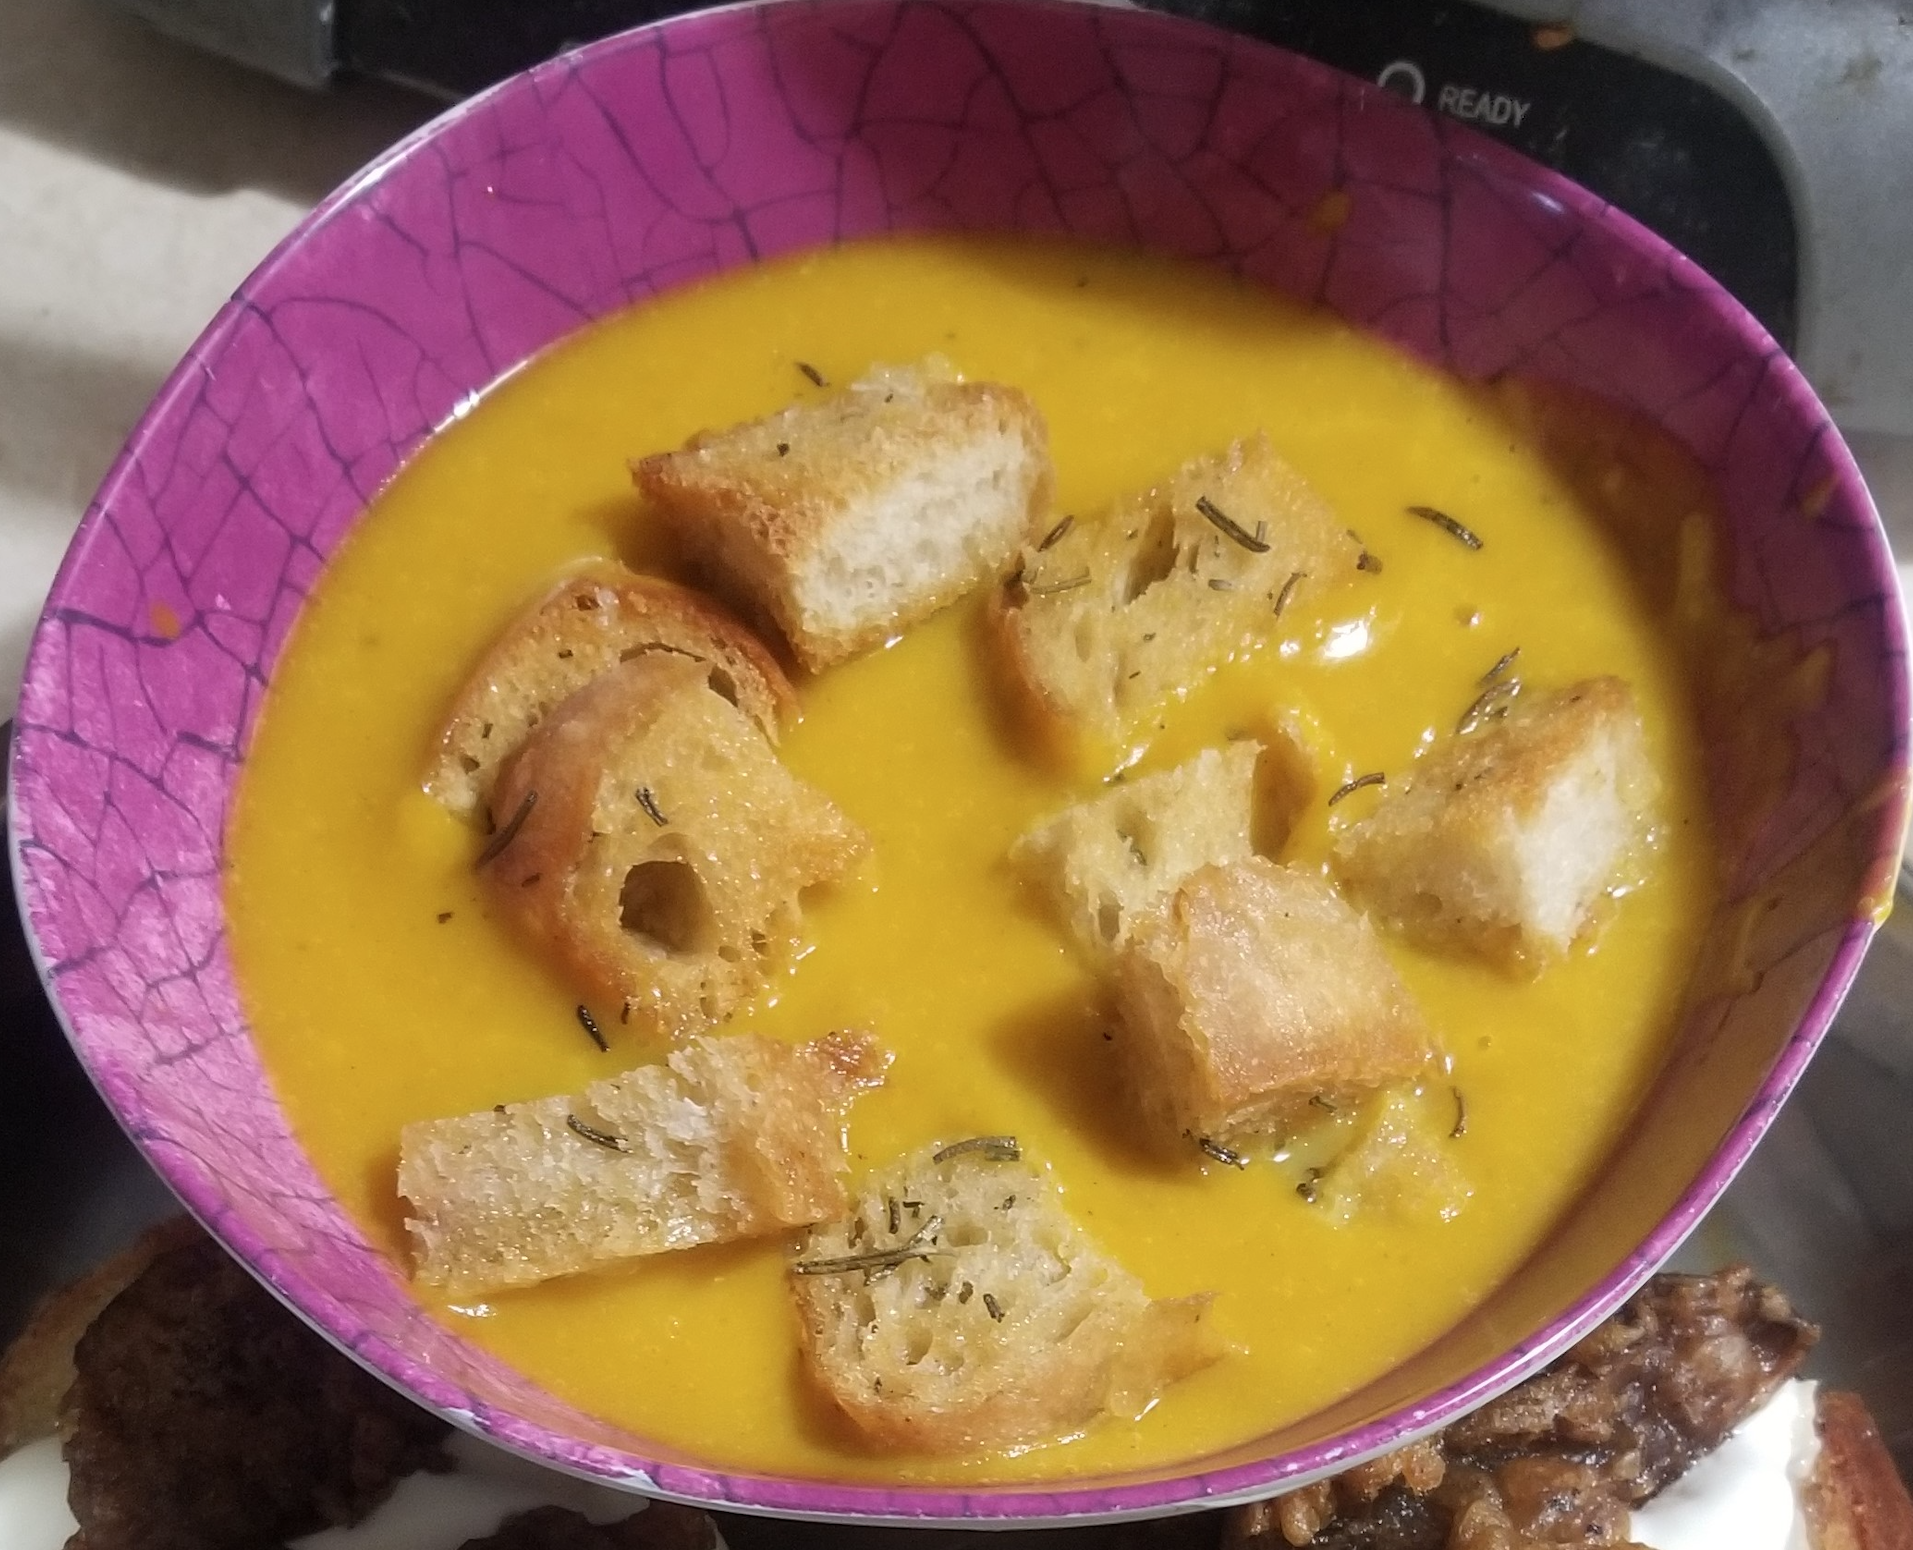 Pink bowl holding a vibrant gold colored soup topped with croutons.